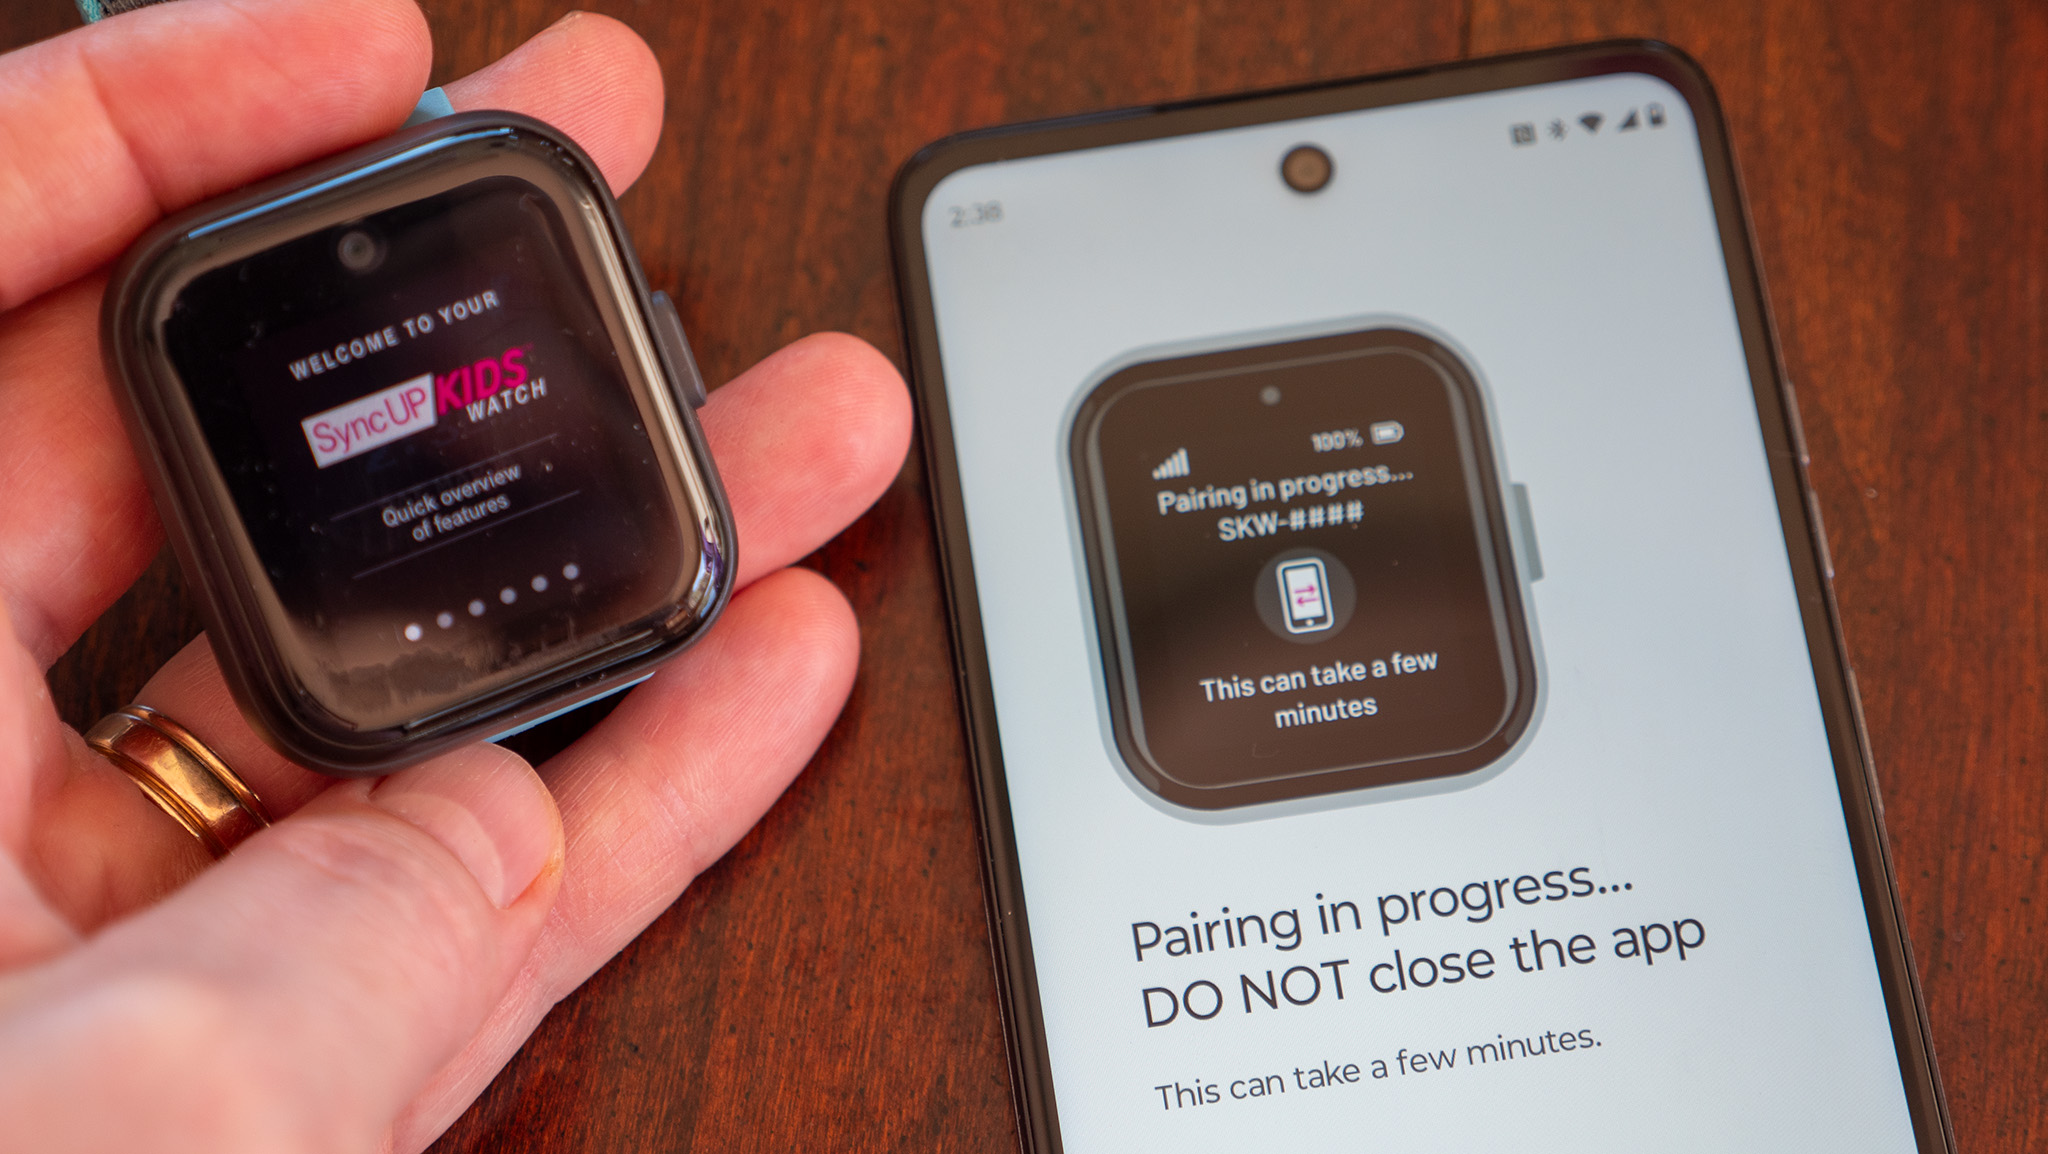 Syncing the T-Mobile SyncUP Kids Watch with the app